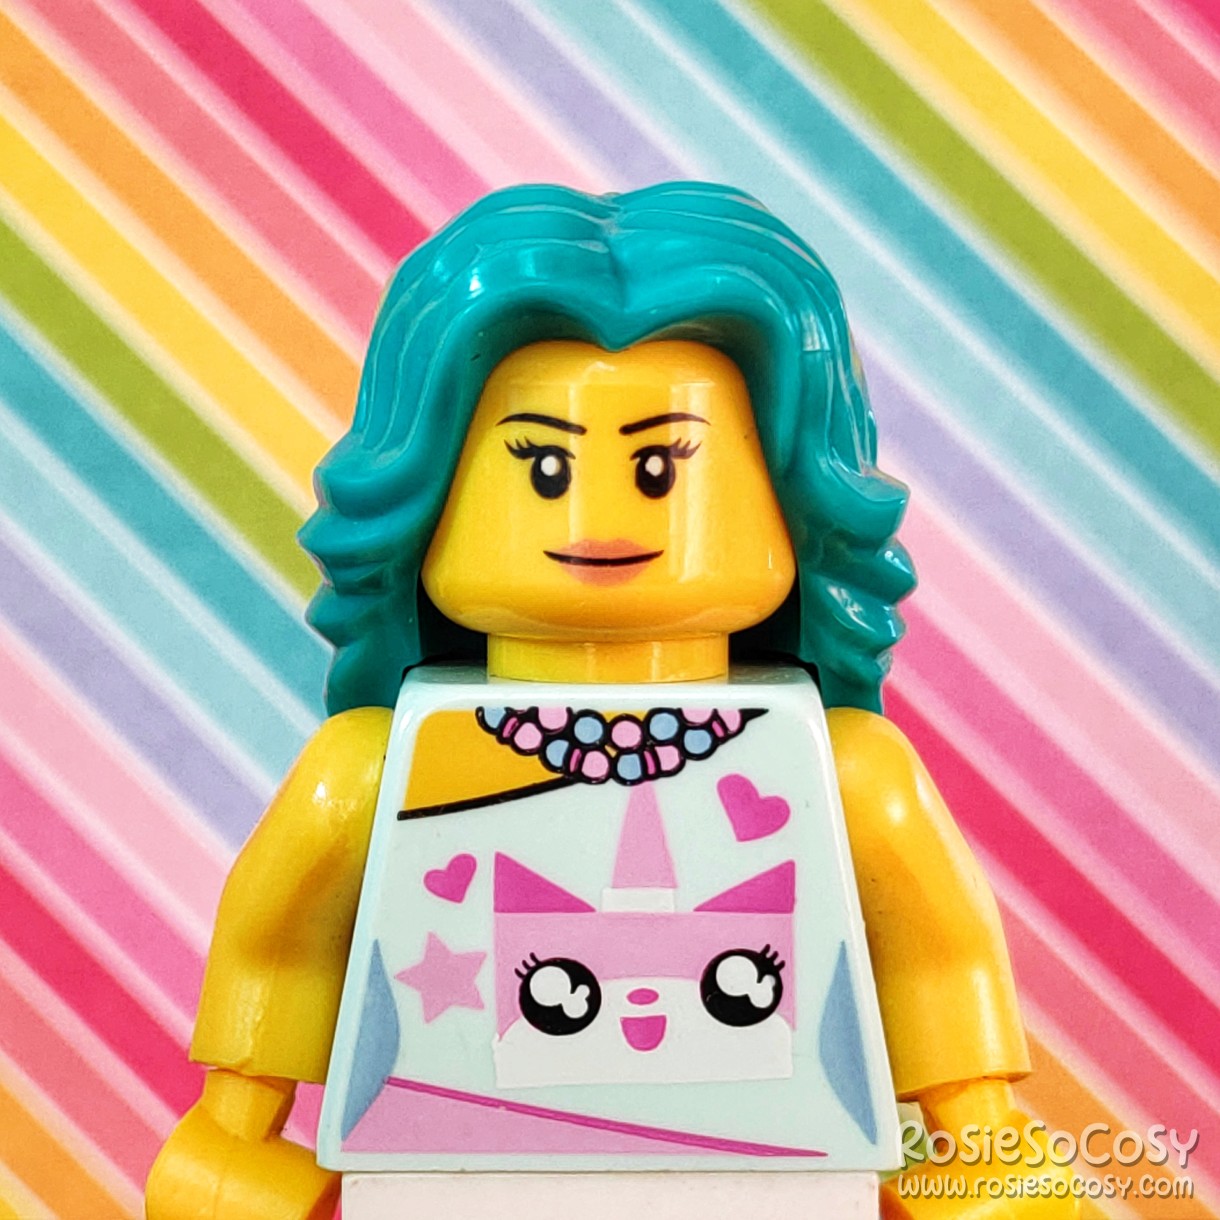 Rosie's Minifig with Unikitty Outfit with a diagonal rainbow striped background.